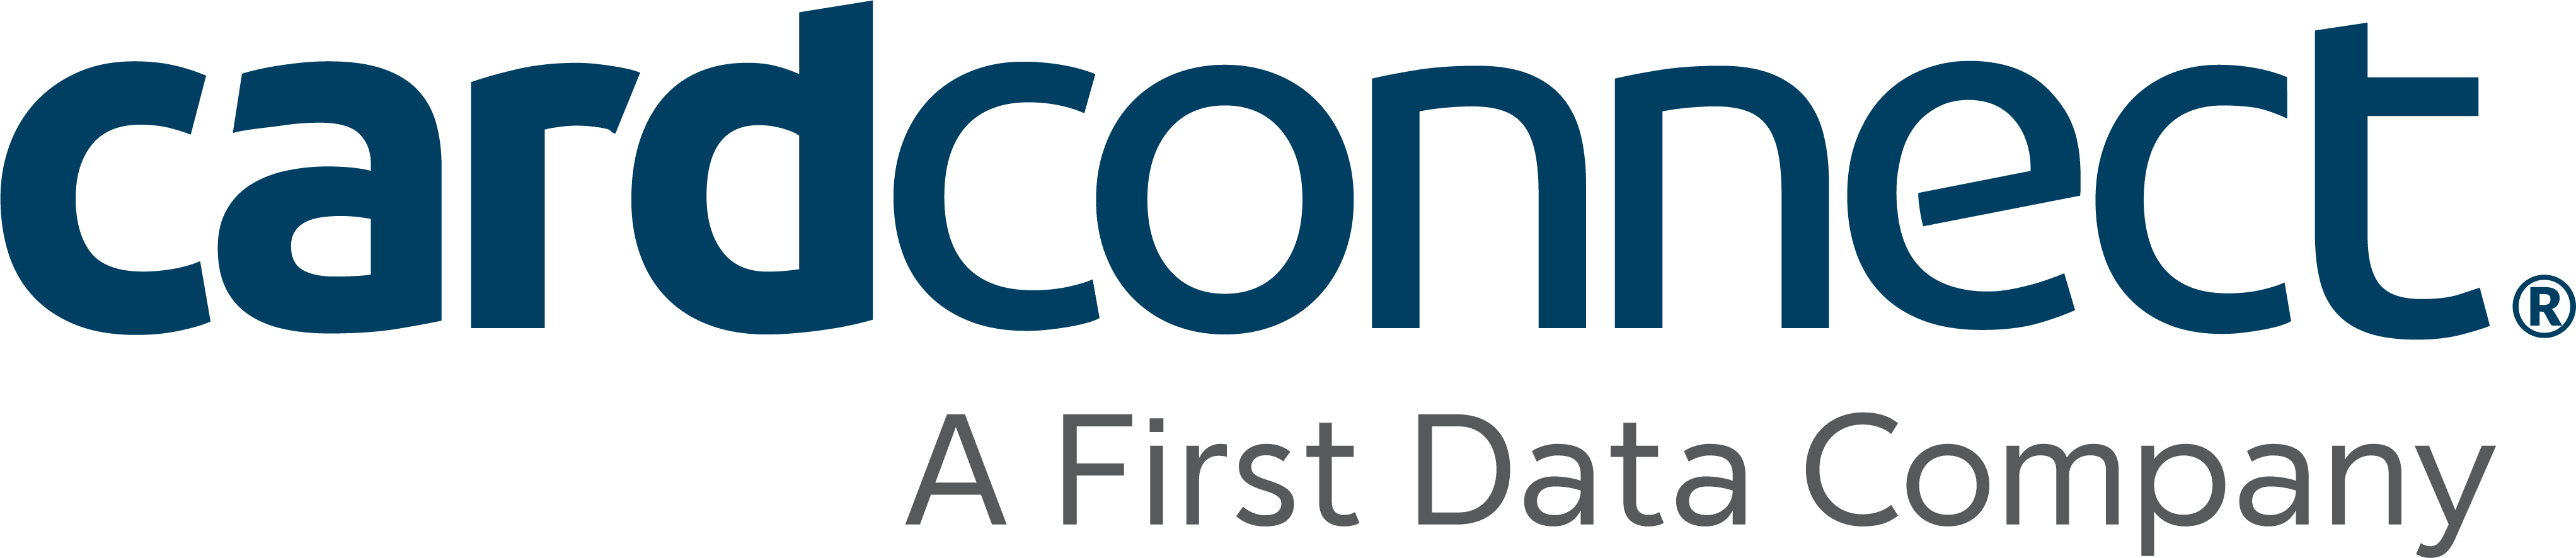 CardConnect A First Data Company Logo